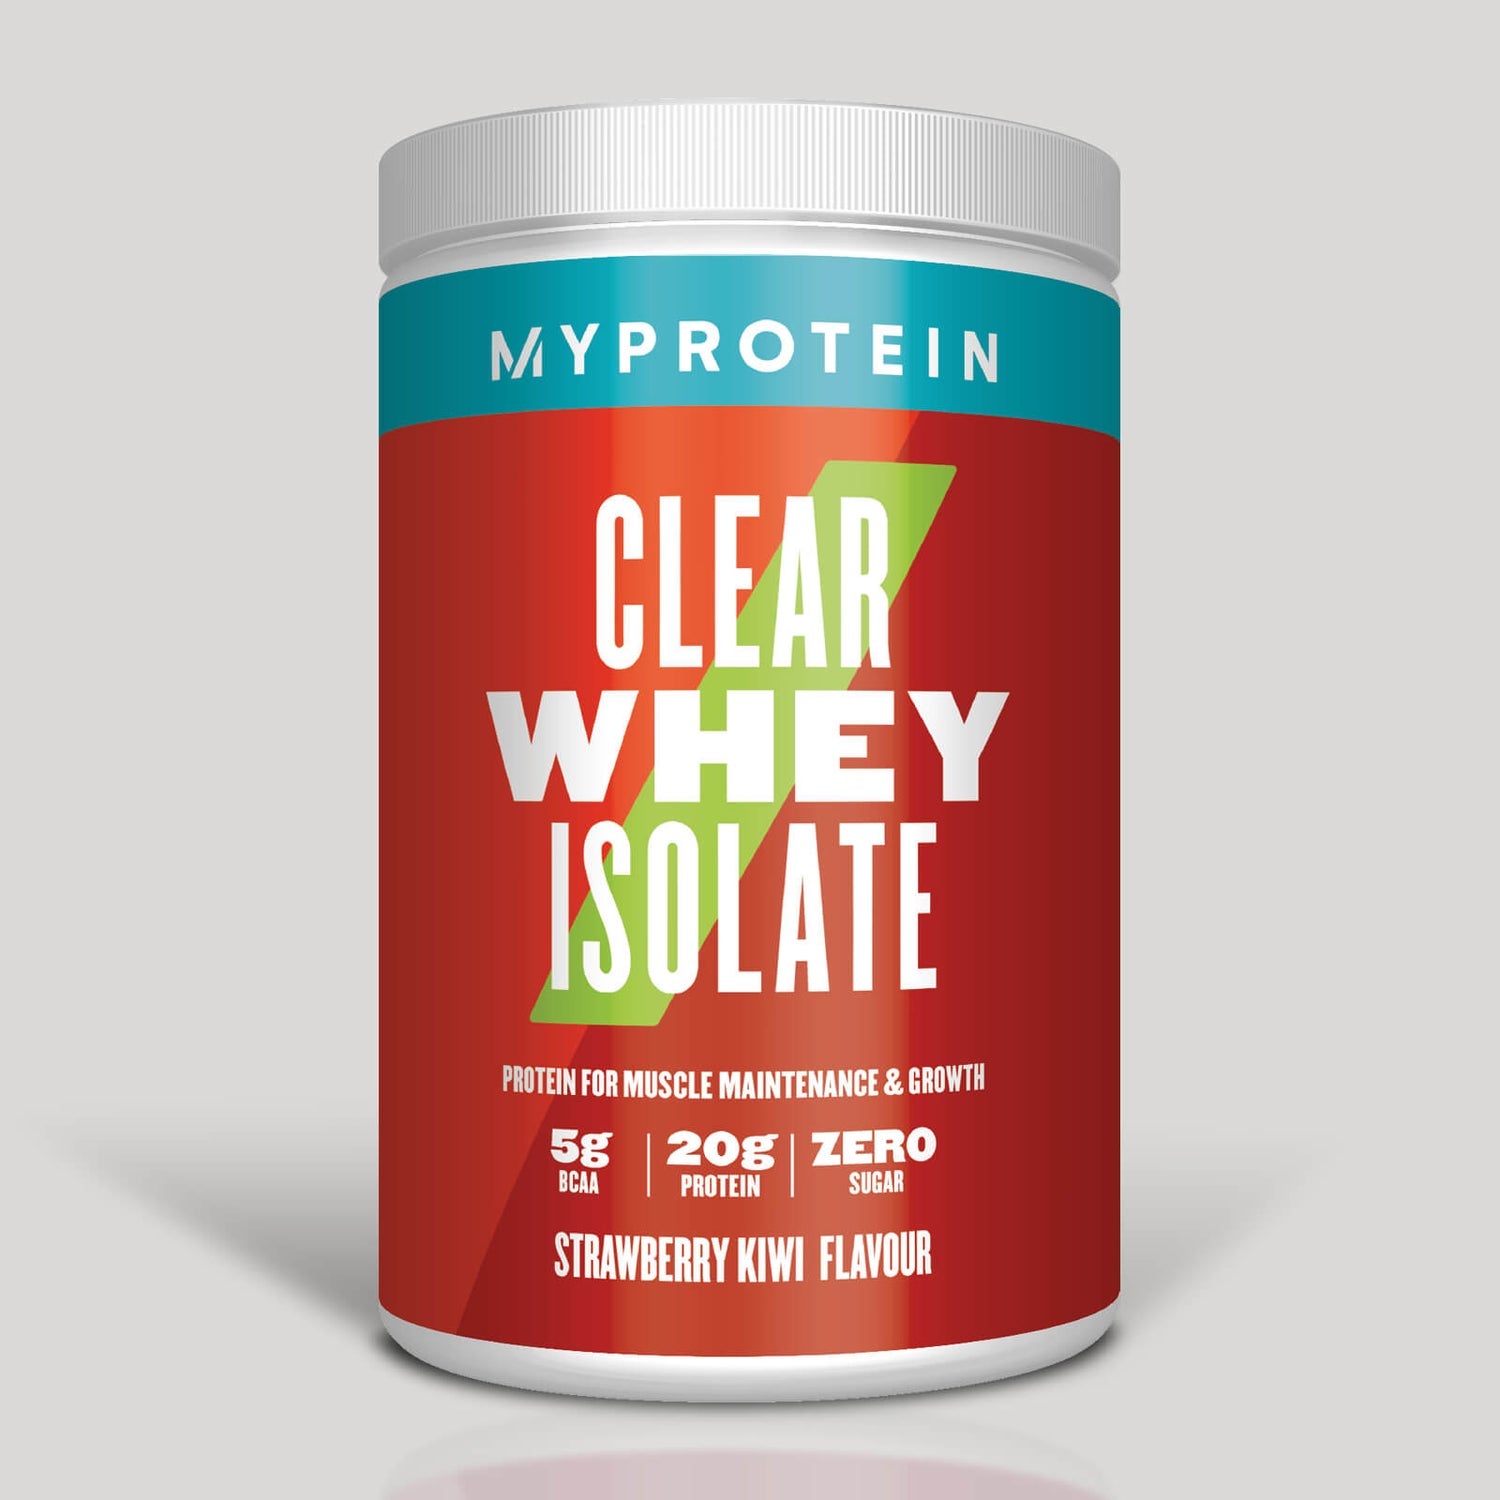 MYPROTEIN Clear Whey Isolate